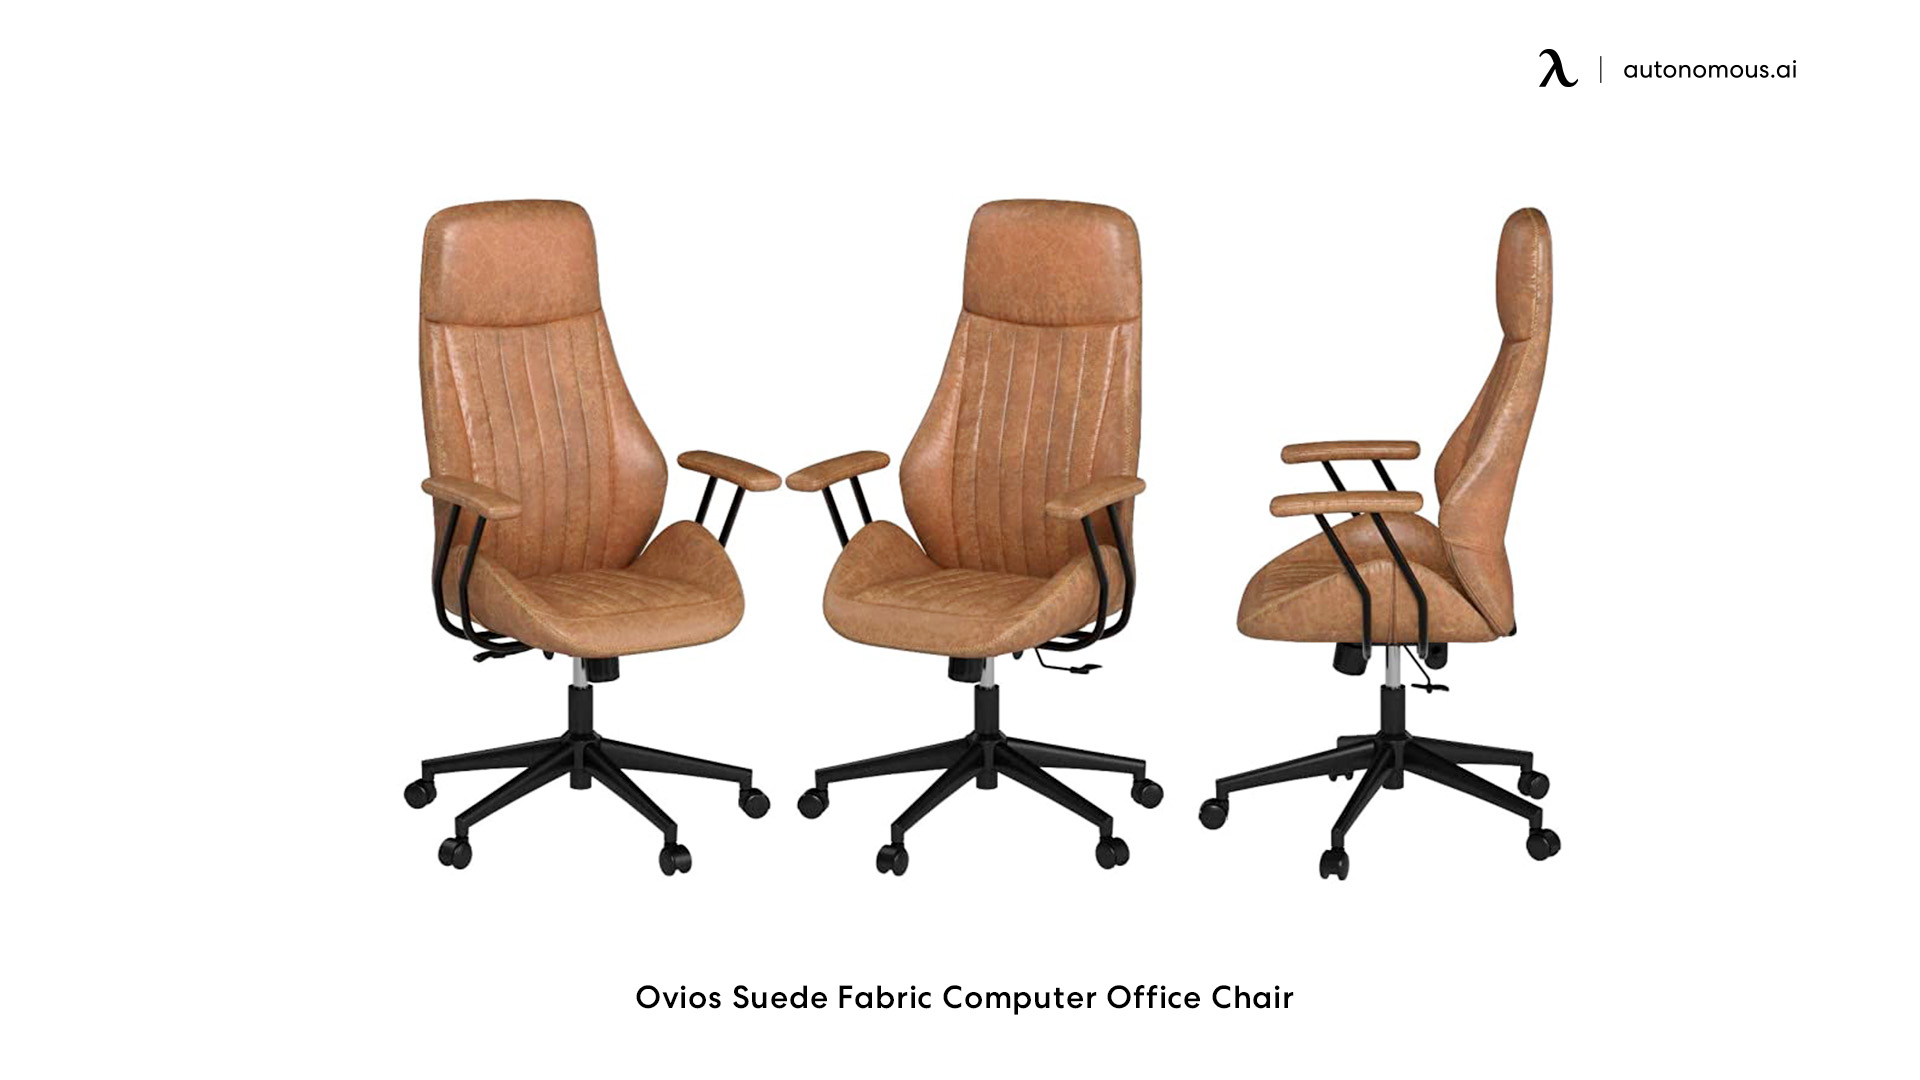 Ovios Suede Fabric Computer Office Chair